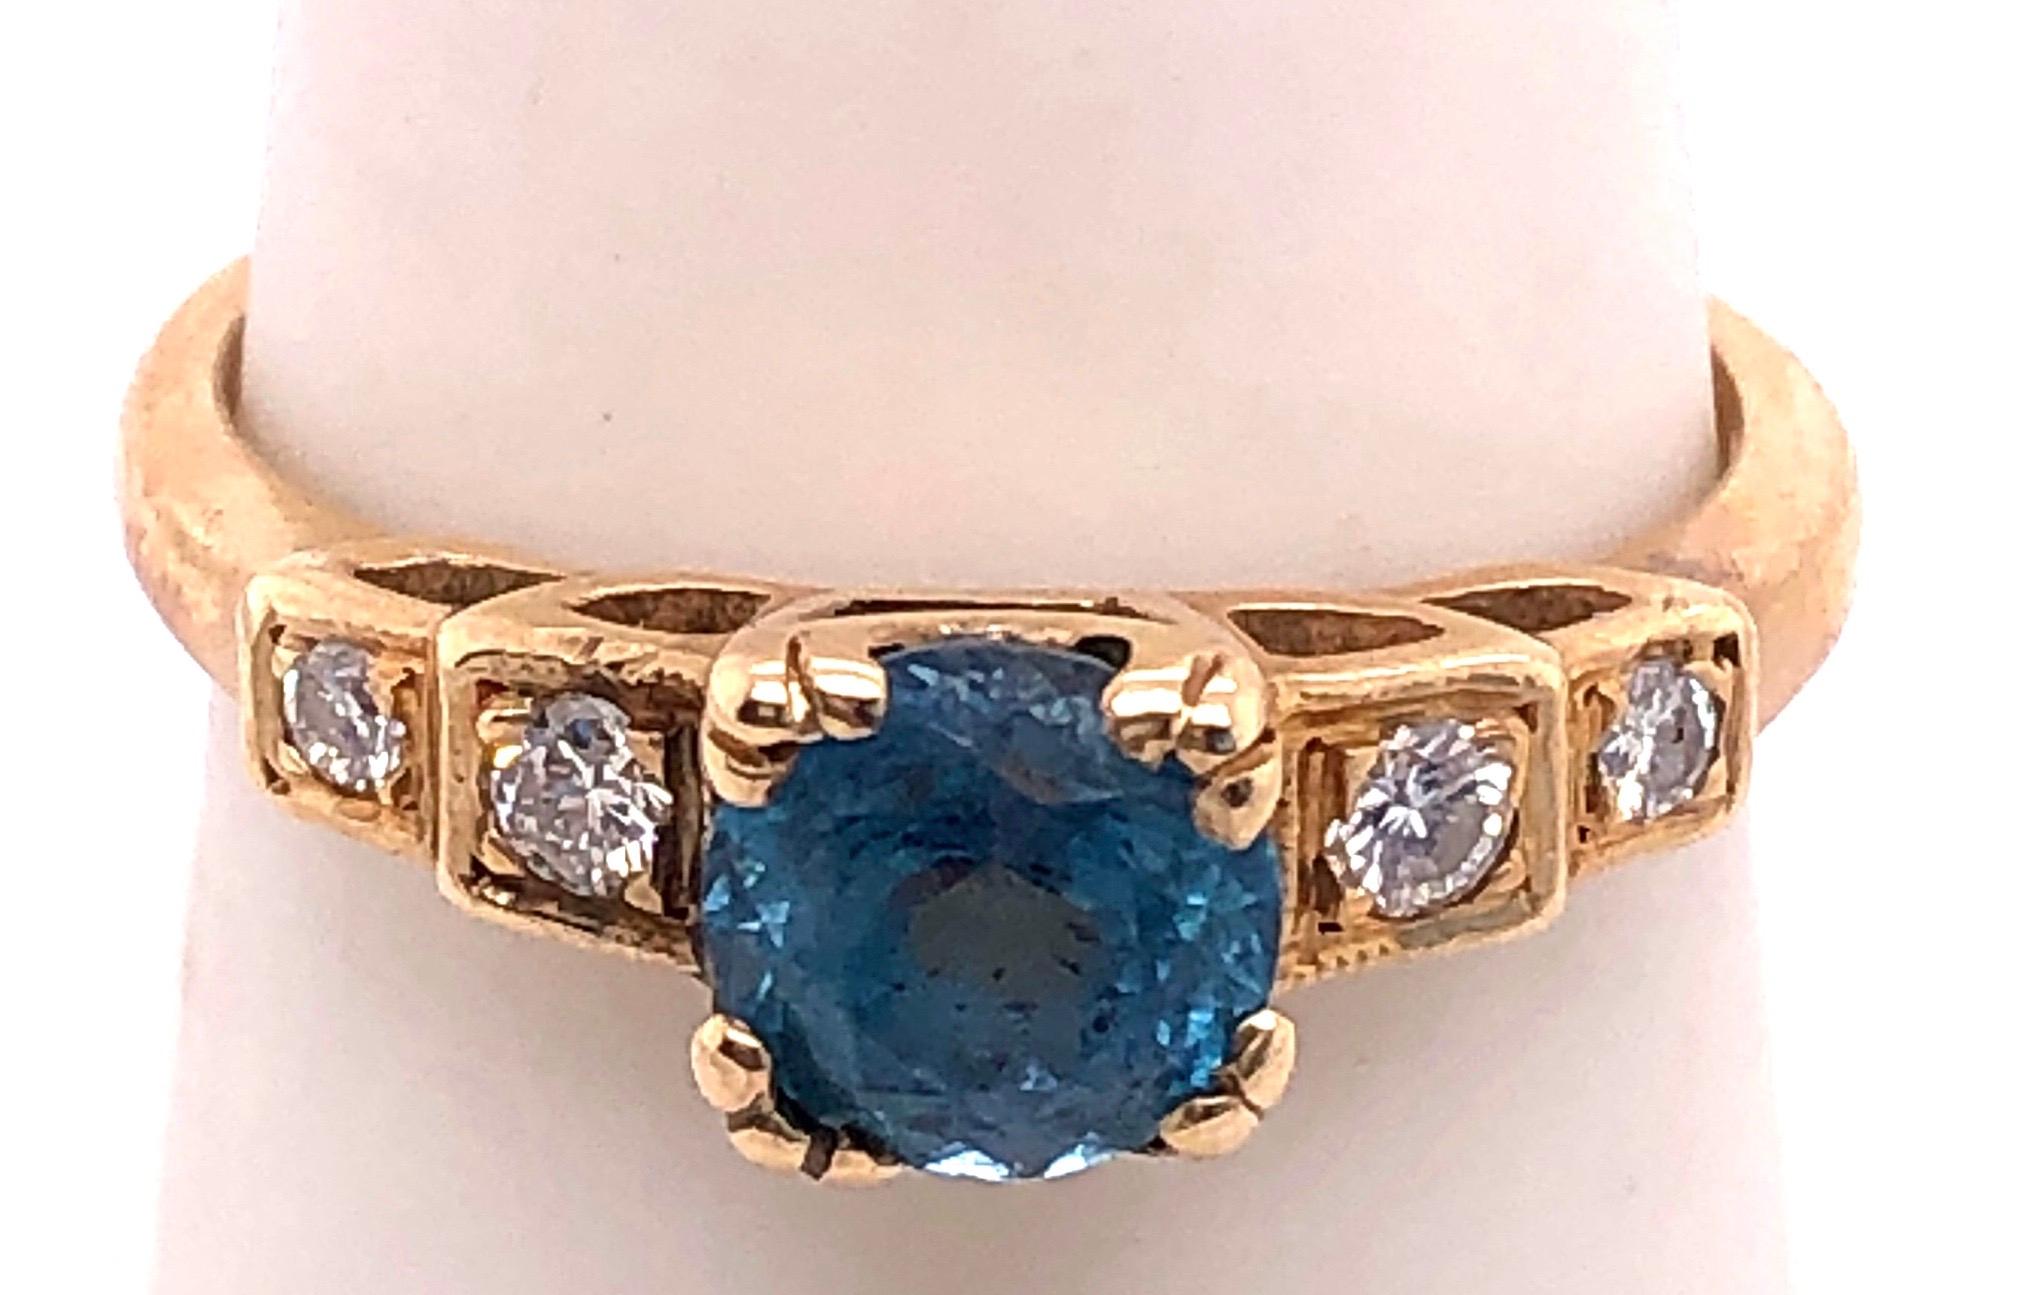 14 Karat Yellow Gold Fashion Round Blue Topaz With Diamond Accents Ring
Size 7.5
3 grams total weight.